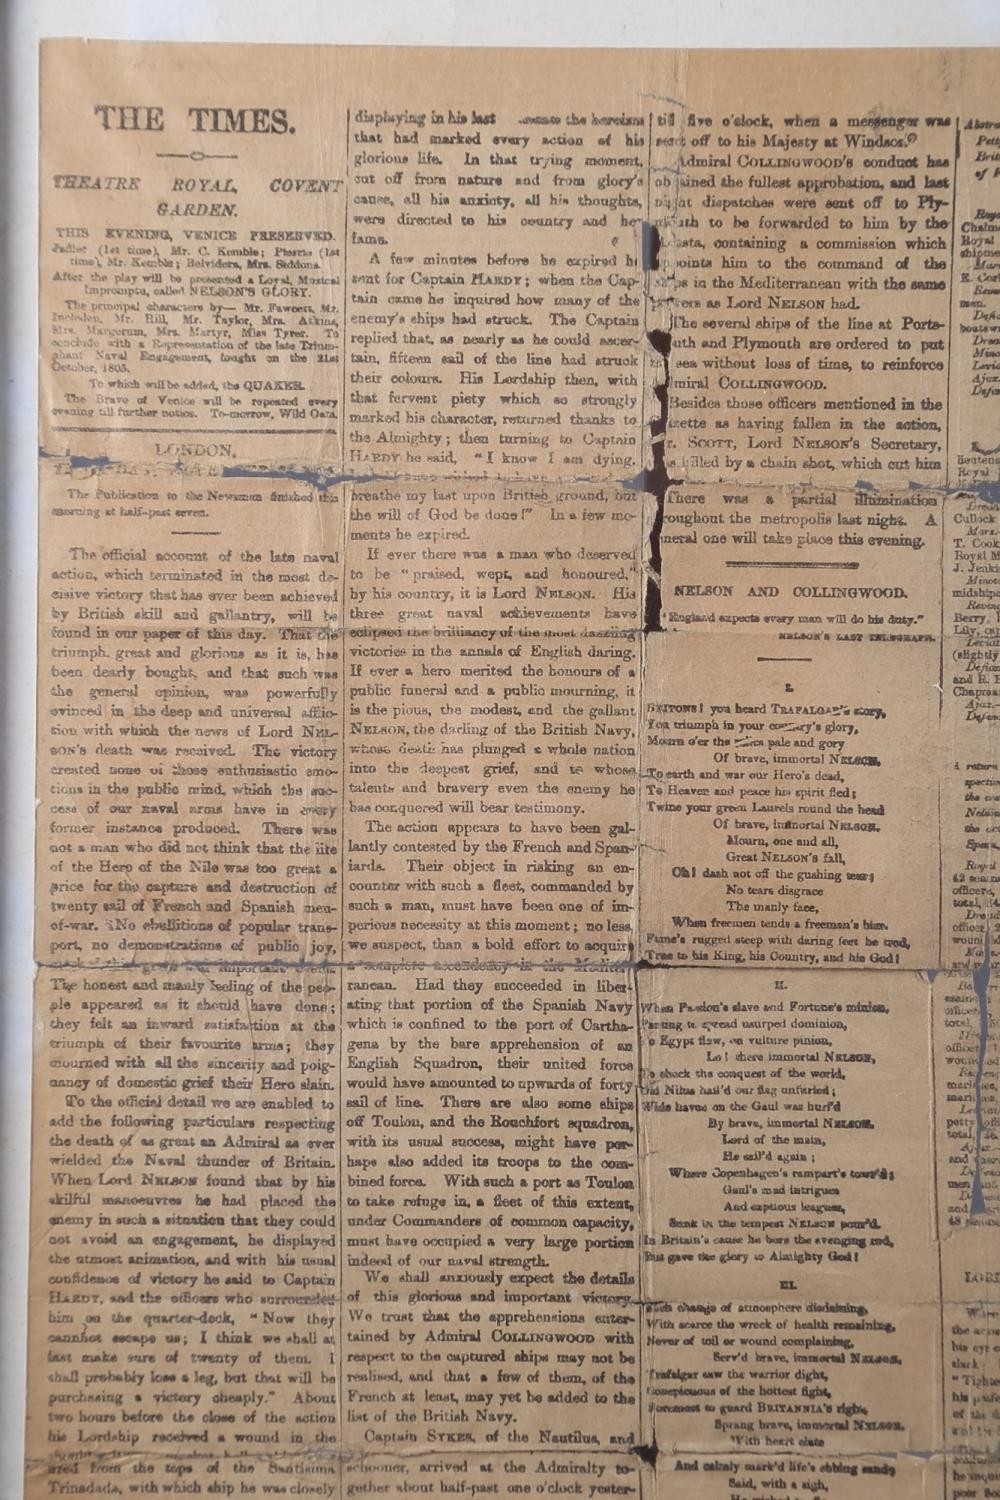 A facsimile copy of The Times for November 7th 1805 recording the battle of Trafalgar, in double